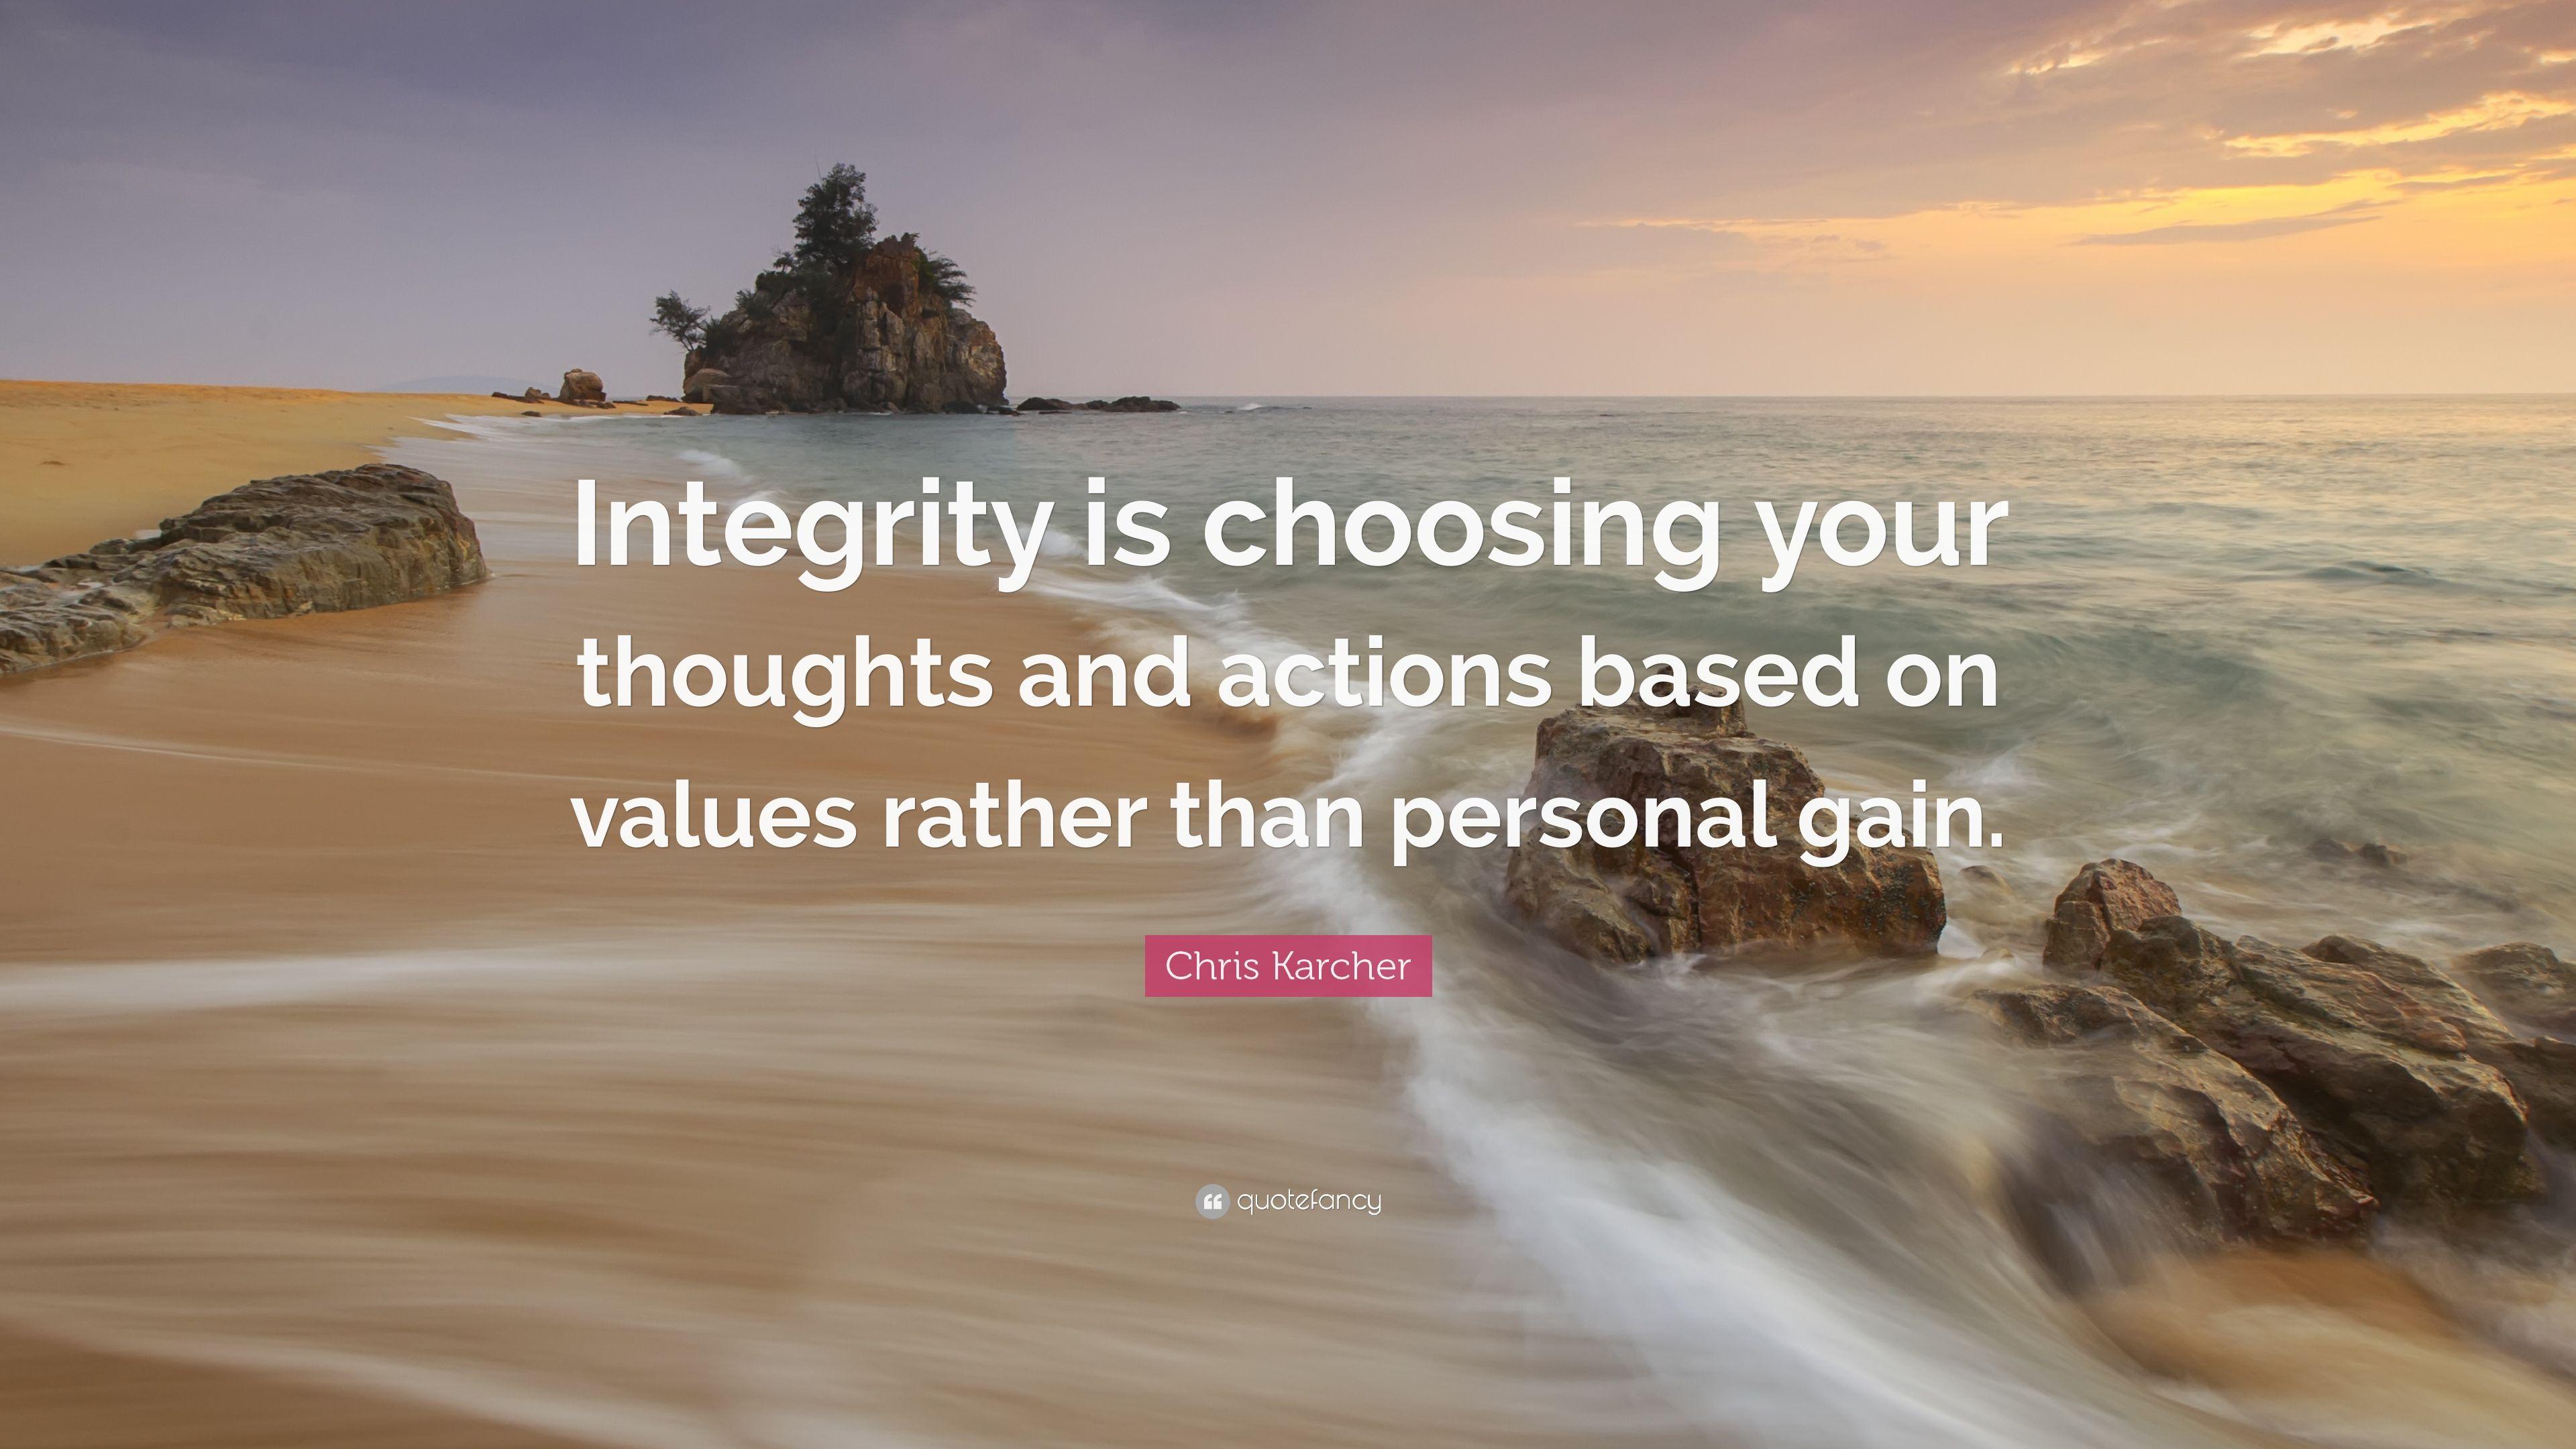 Chris Karcher Quote: “Integrity is choosing your thoughts